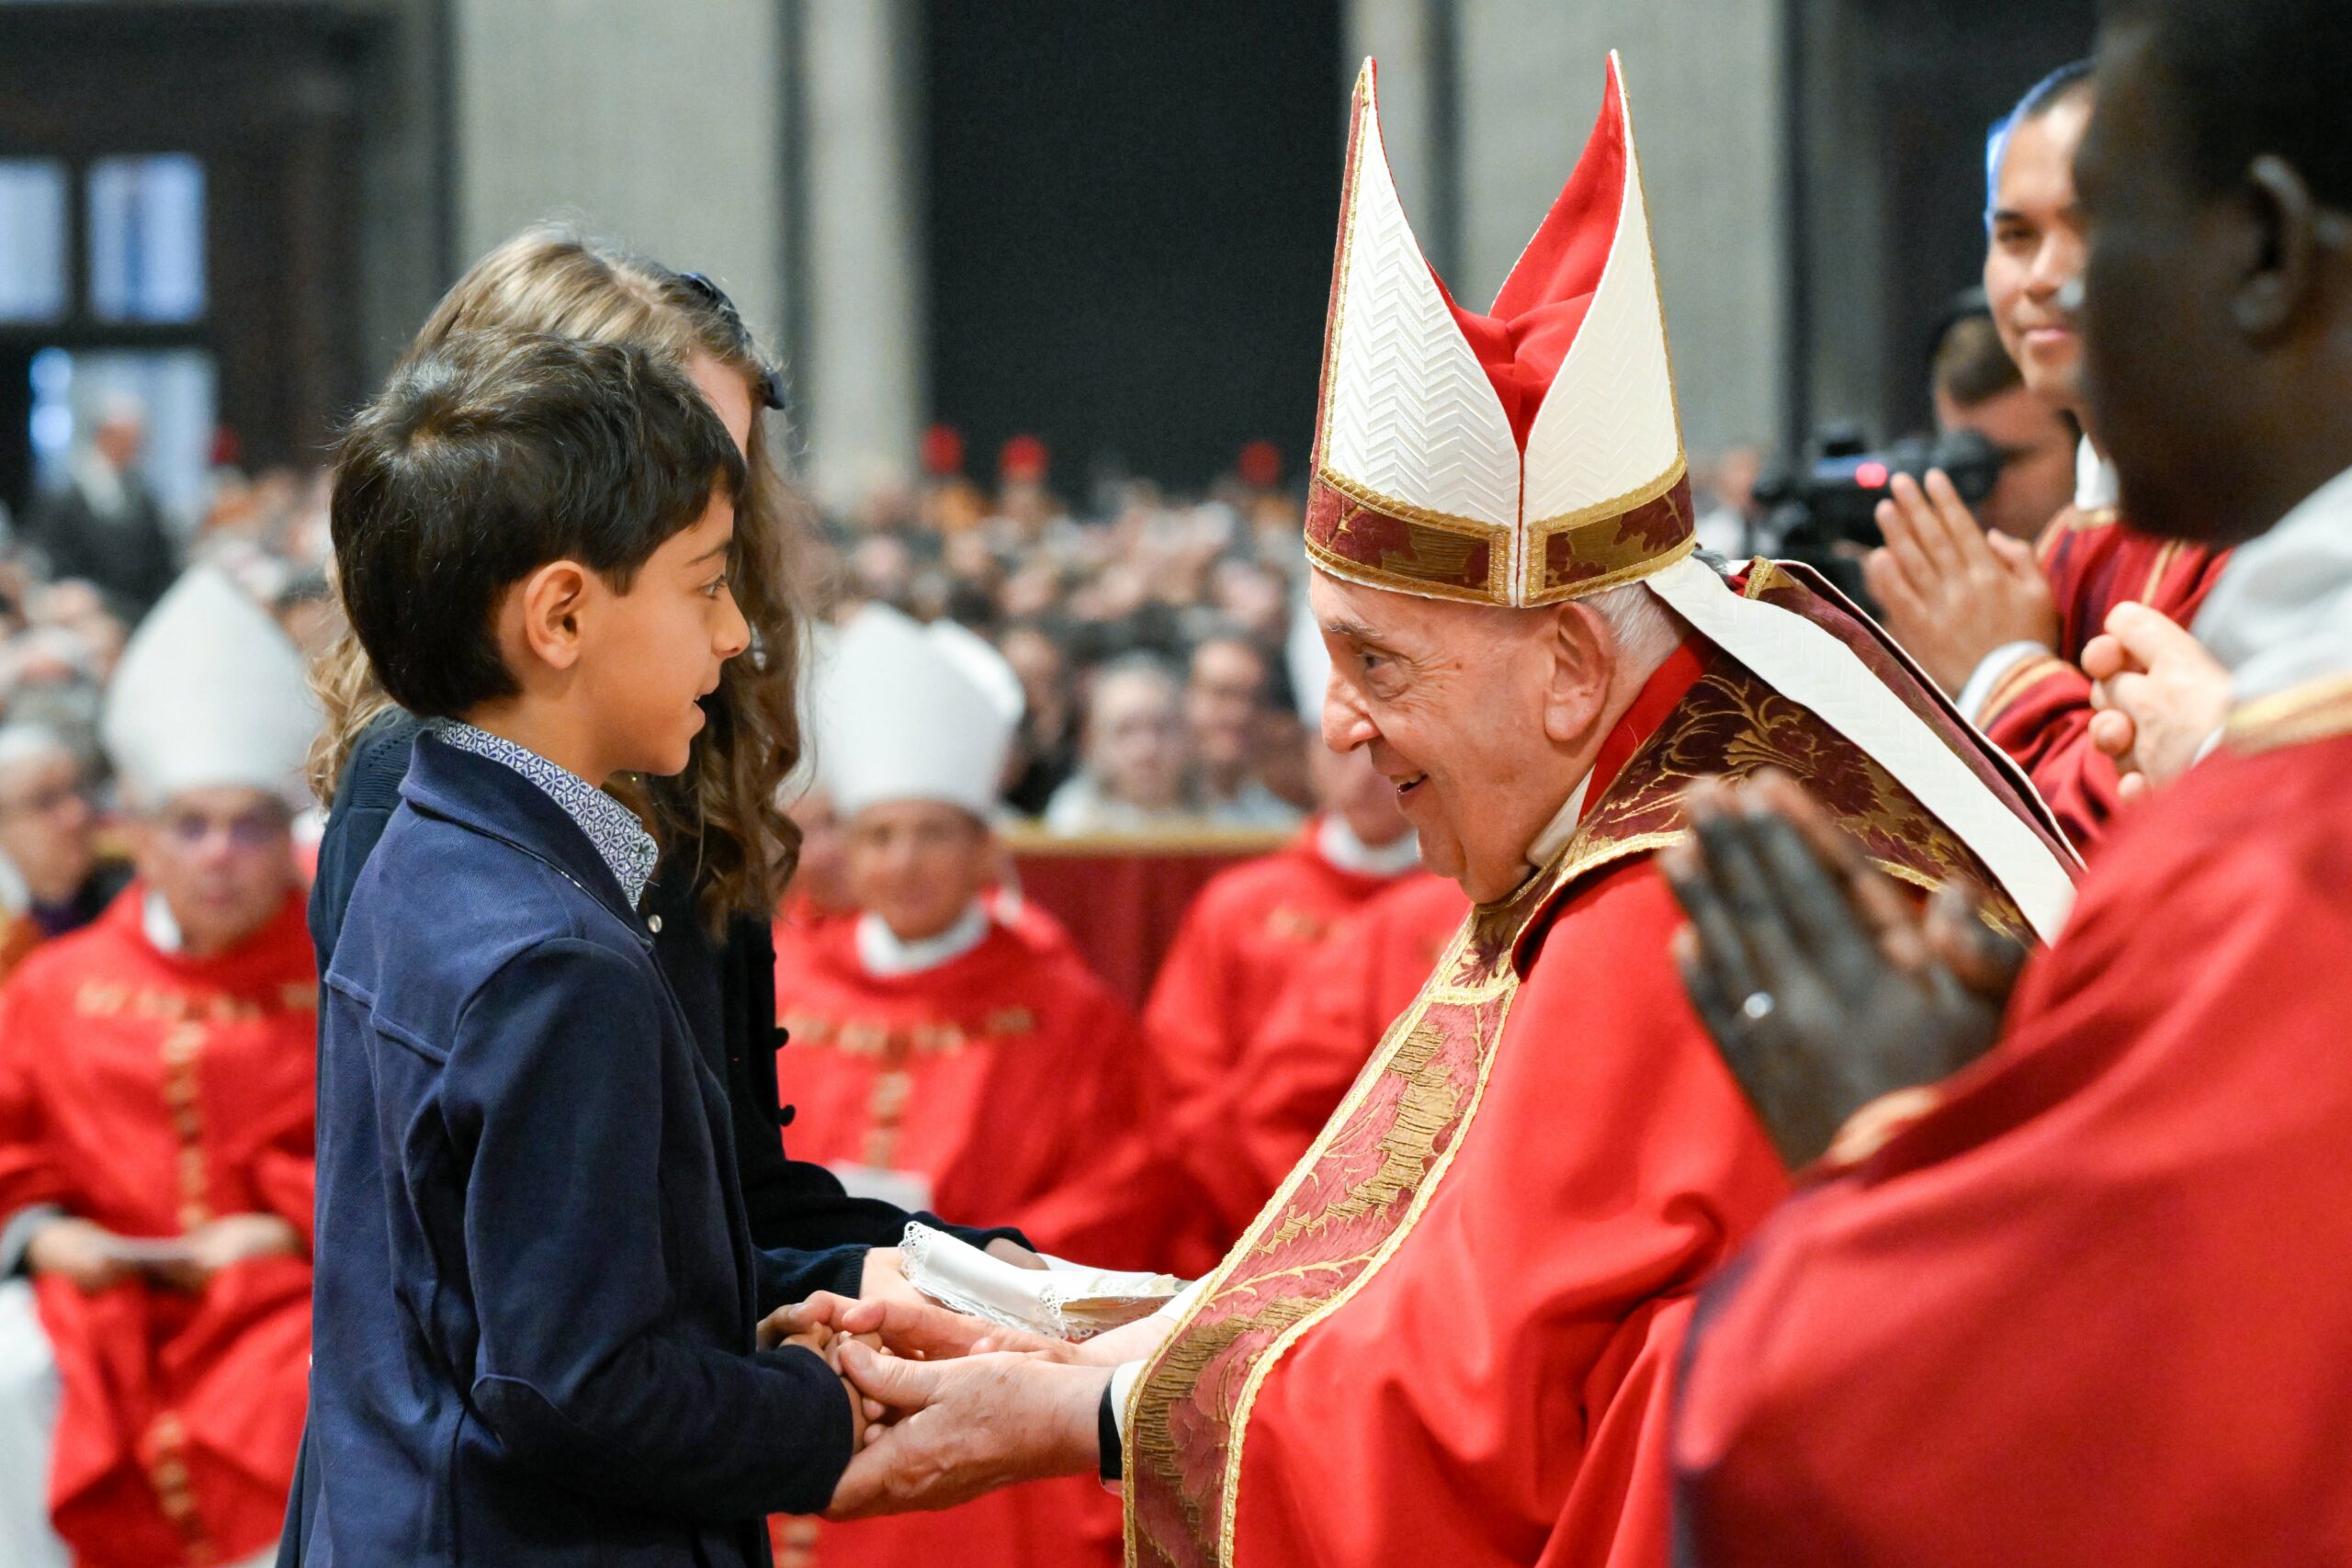 Pentecost: Holy Spirit makes Christians gentle, not ‘overbearing,’ pope says